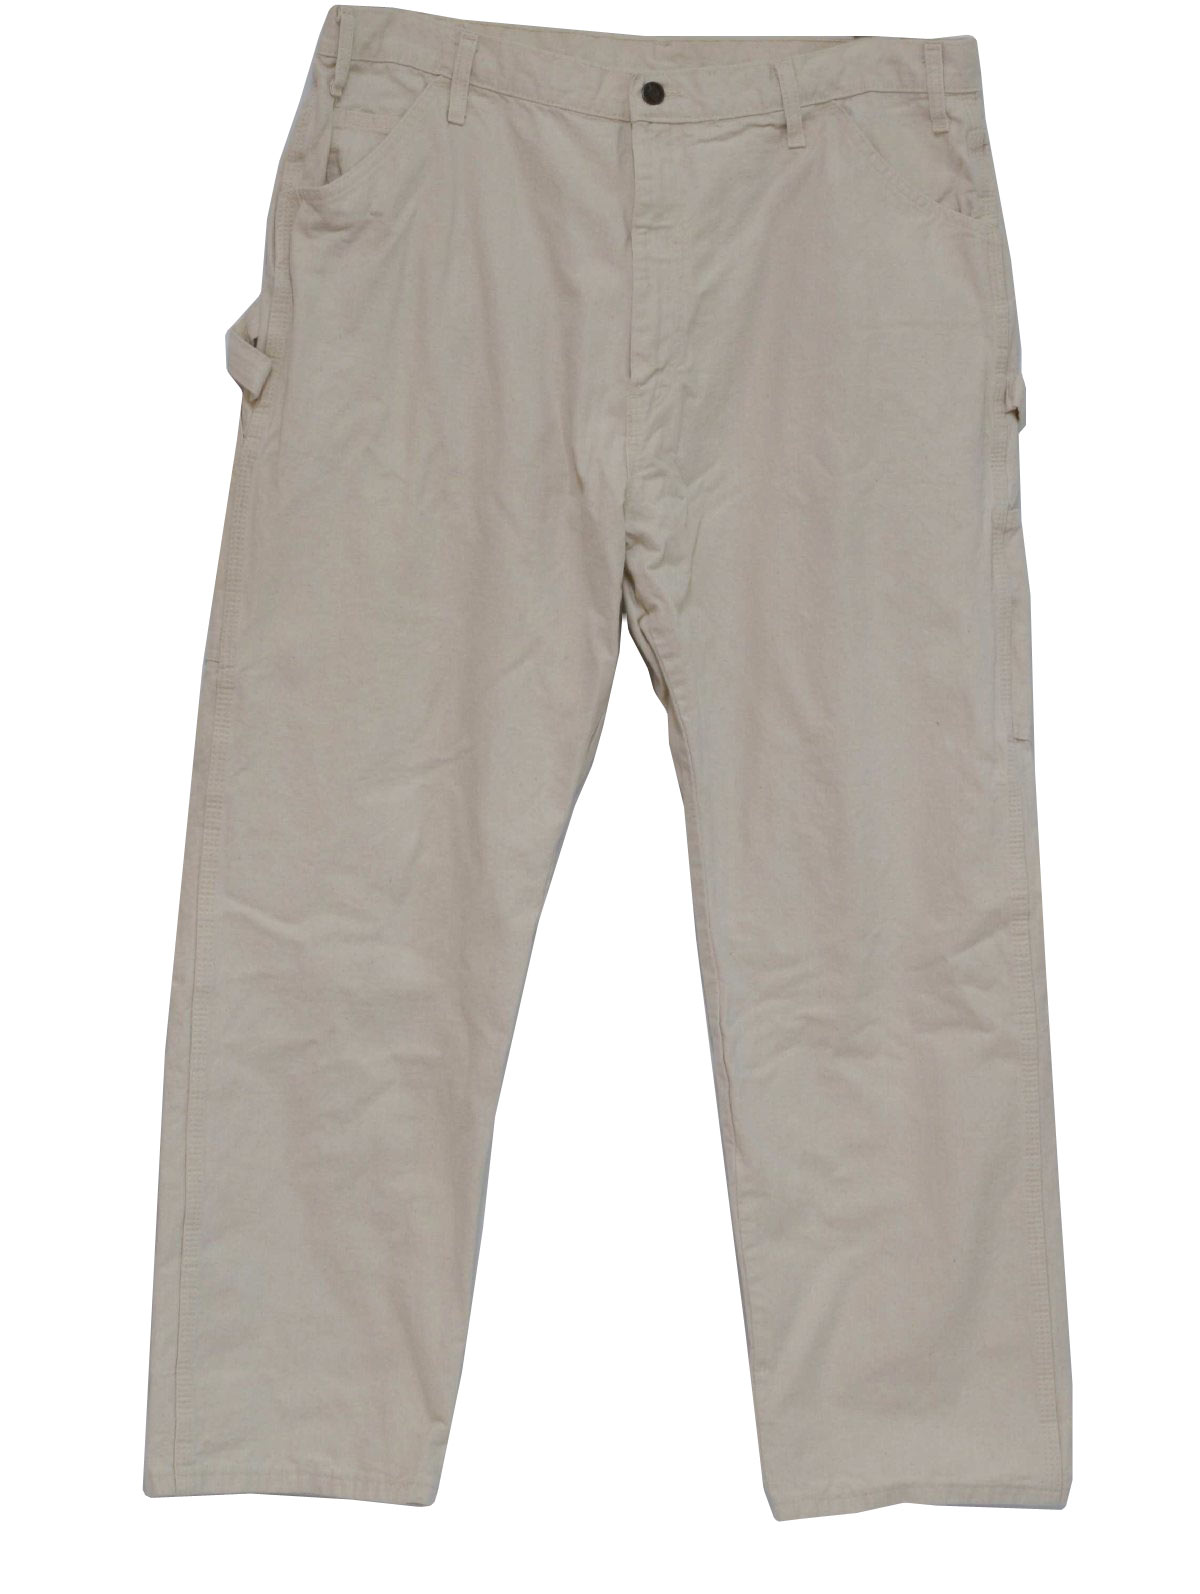 80's Vintage Pants: 80s -Dickies- Mens off white straight leg relaxed ...